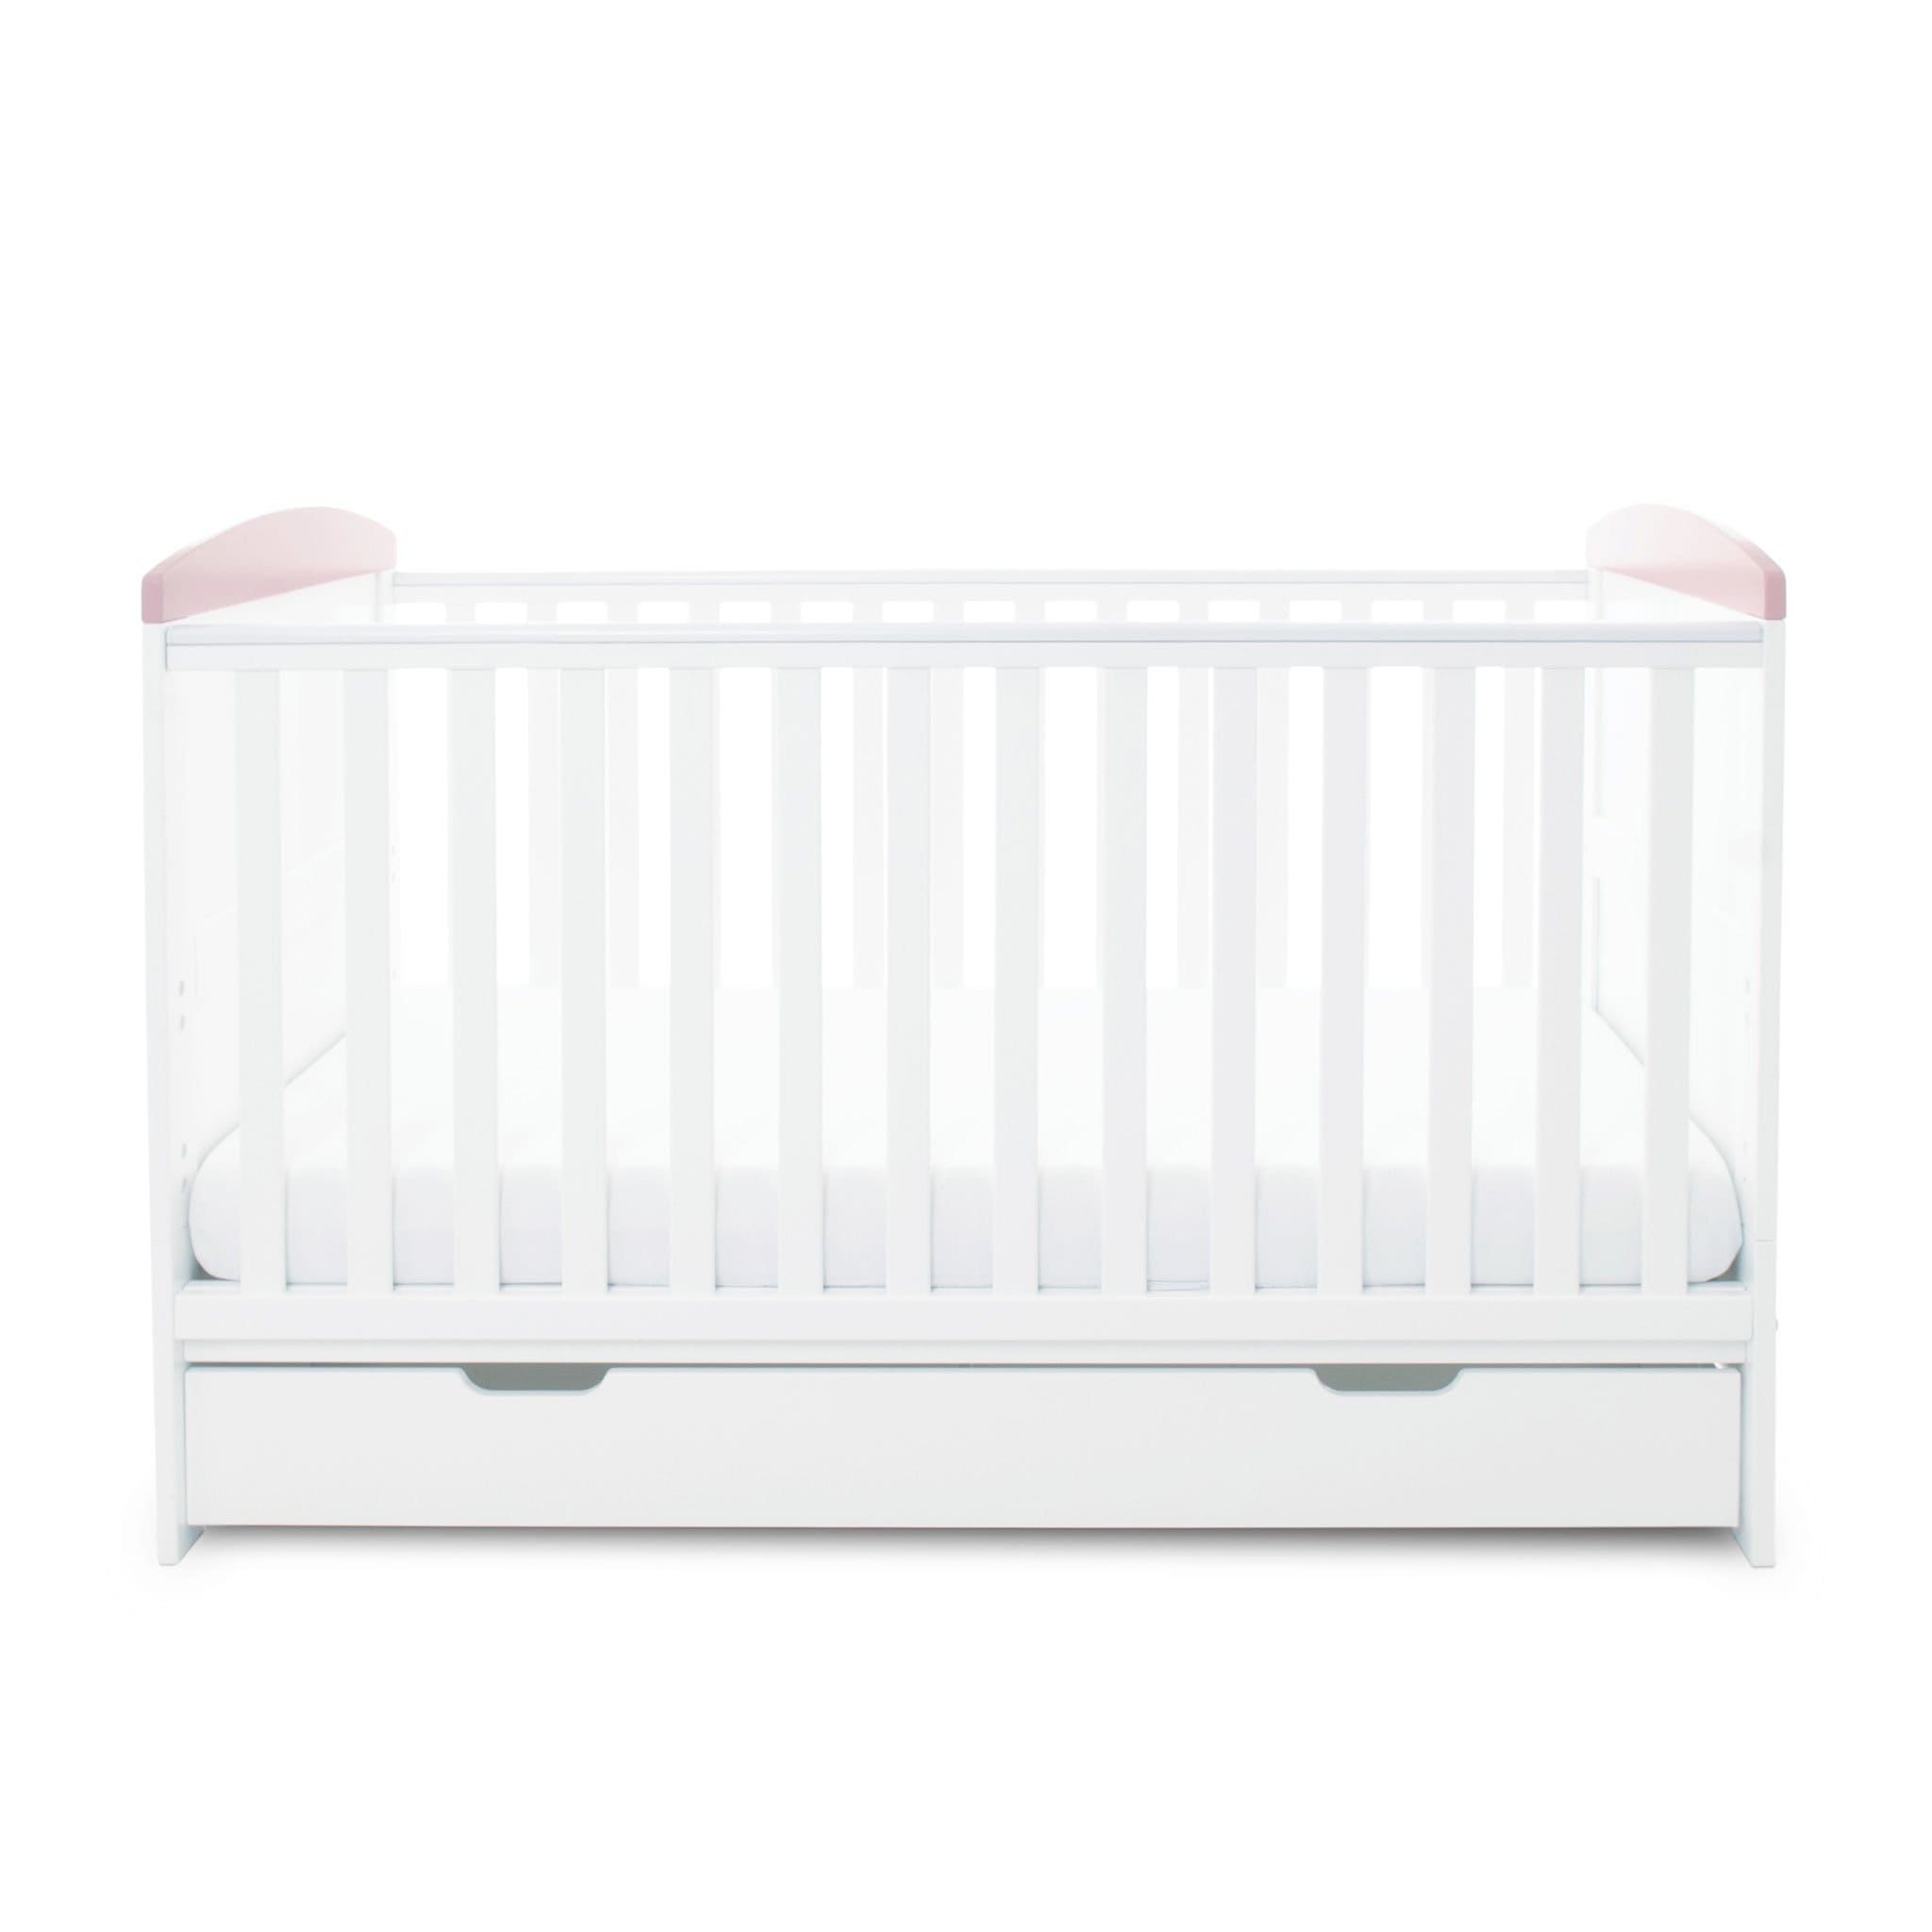 Ickle Bubba Coleby Style 2 Piece Furniture Set with Under Drawer Elephant Love Pink Nursery Room Sets